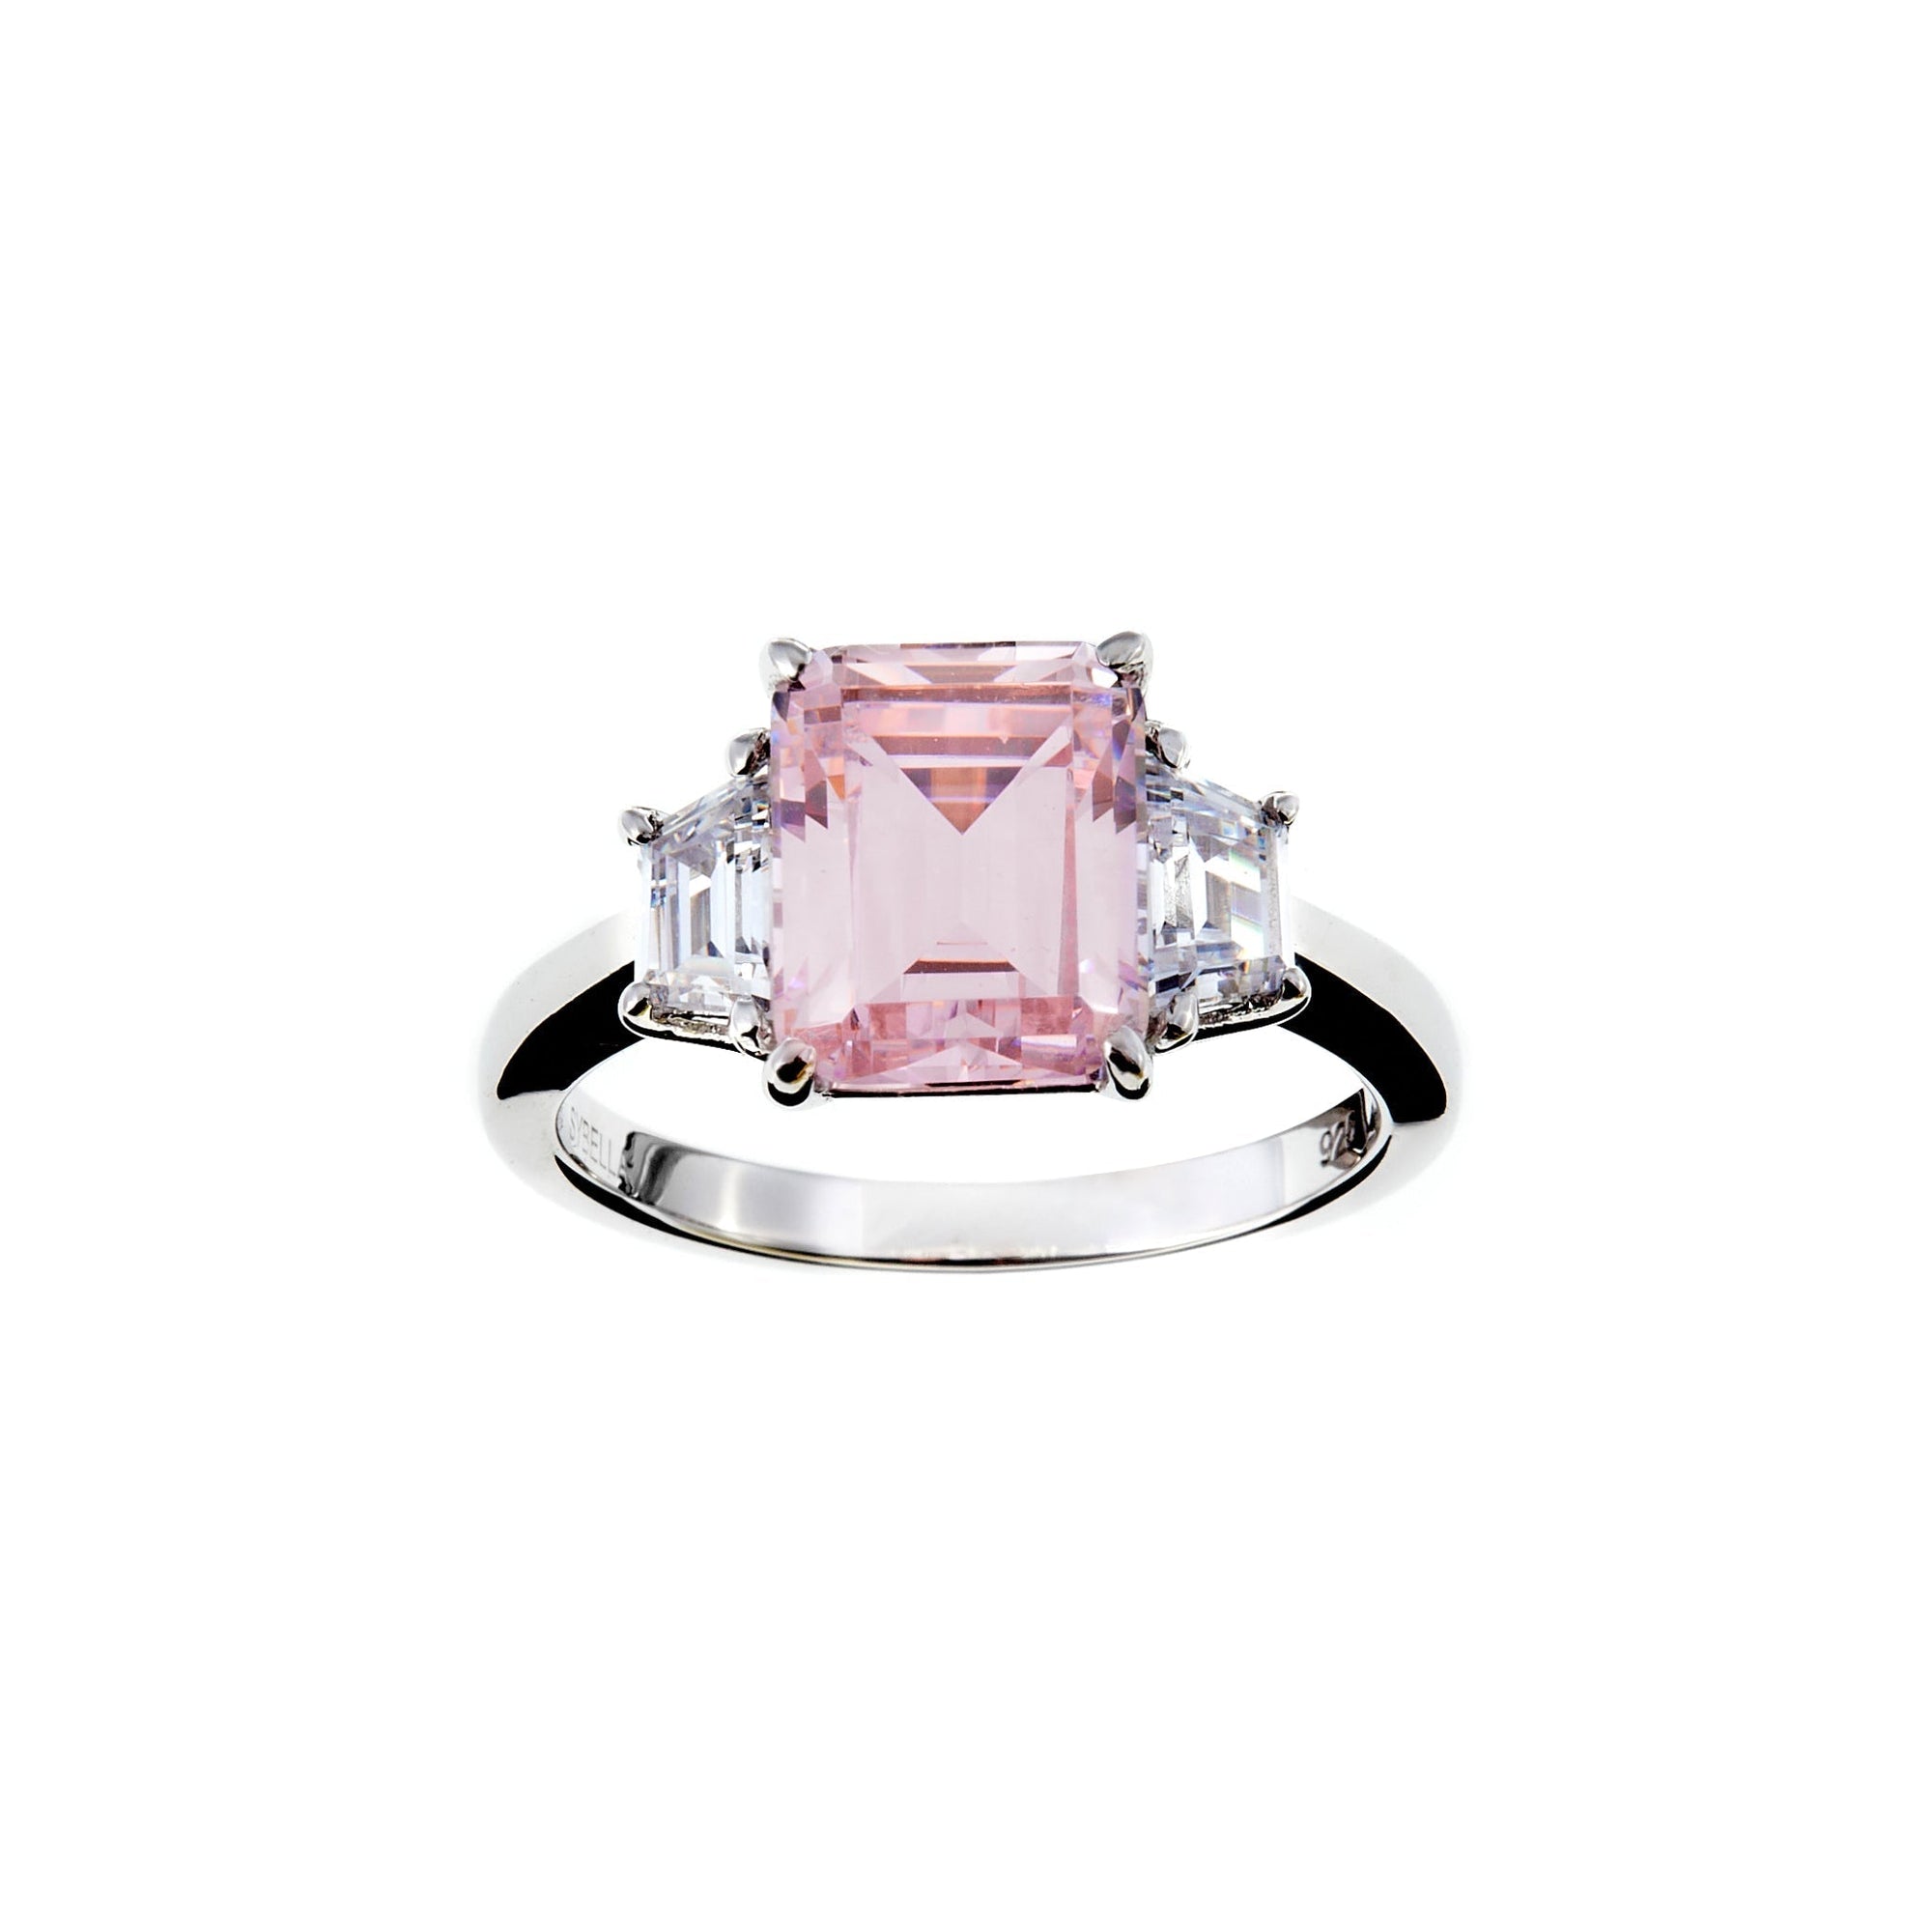 Sybella Rings Josephine Pink And Clear Ring